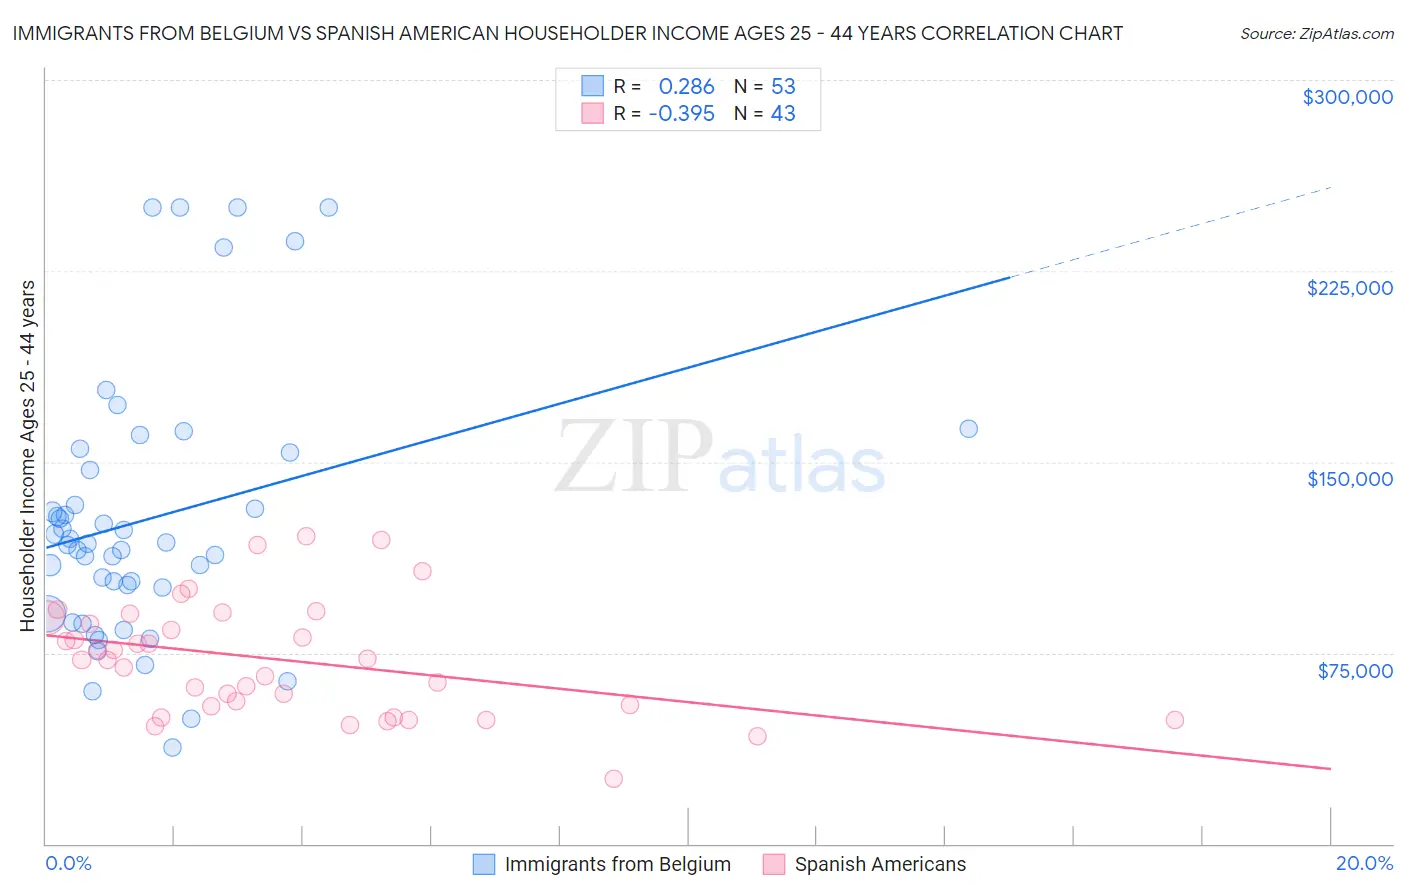 Immigrants from Belgium vs Spanish American Householder Income Ages 25 - 44 years